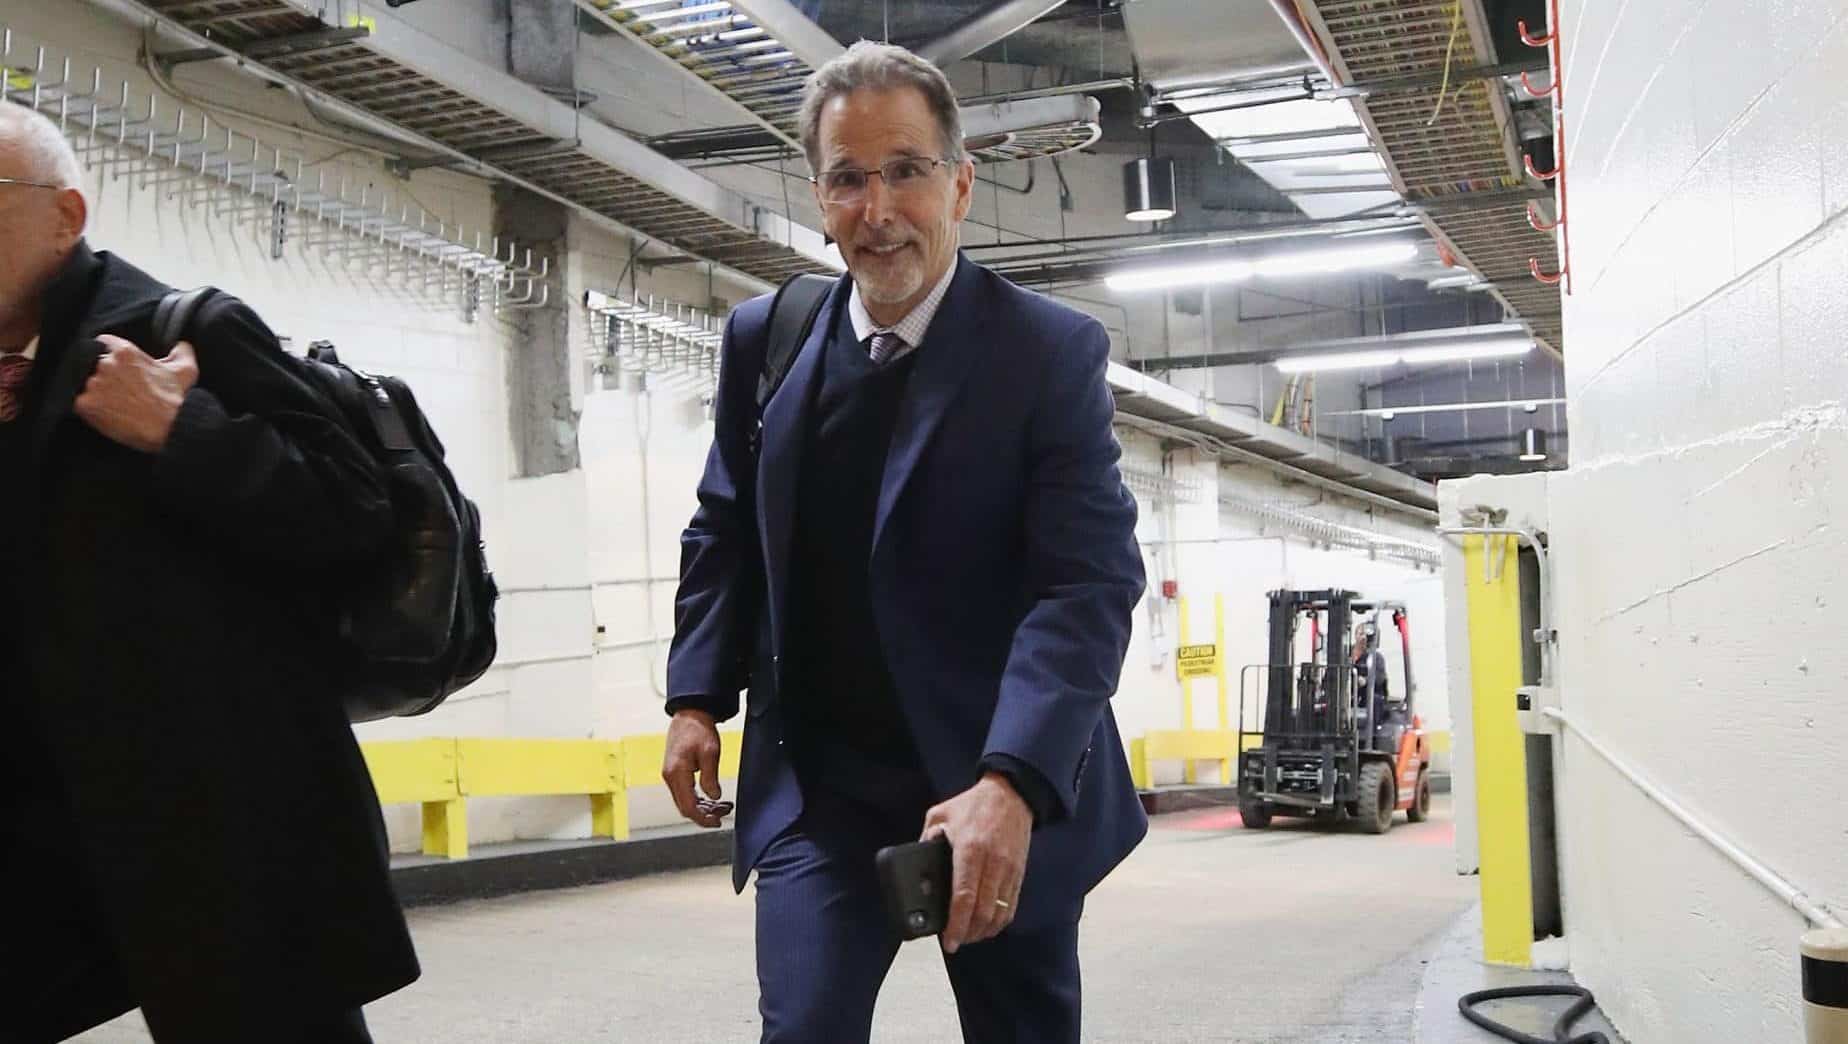 NEW YORK, NEW YORK - APRIL 05: John Tortorella of the Columbus Blue Jackets arrives for the game against the New York Rangers at Madison Square Garden on April 05, 2019 in New York City.